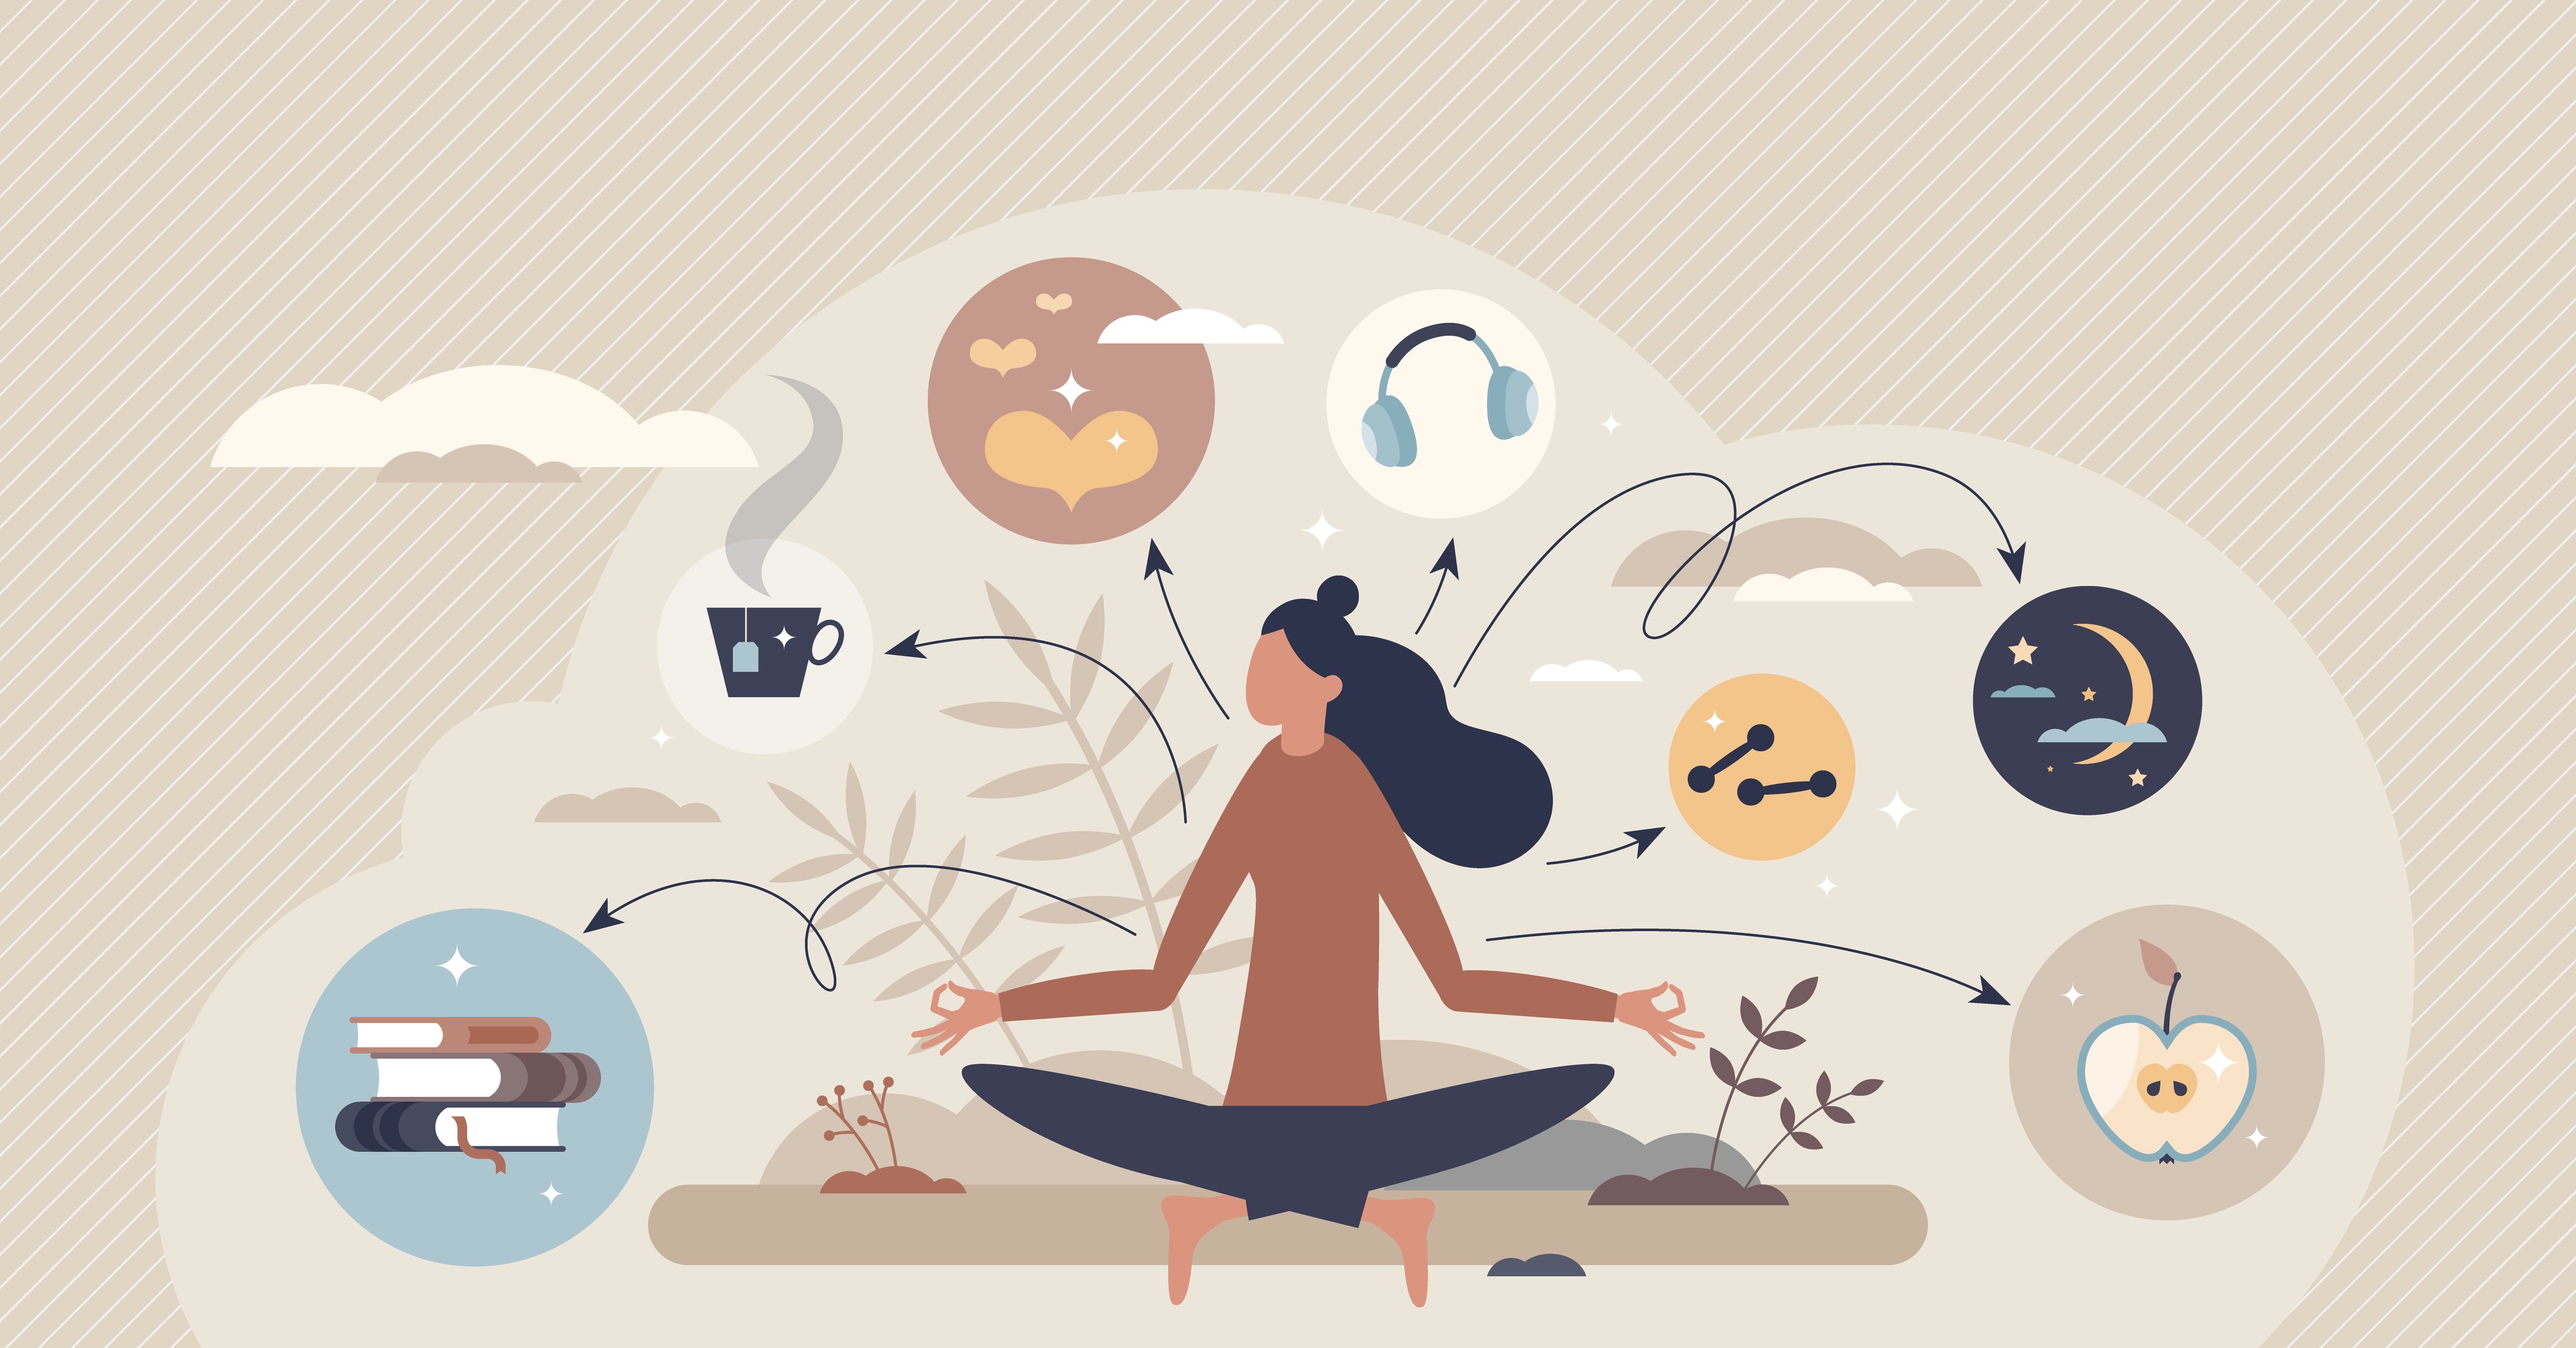 Illustration of a person meditating while arrows point to various wellness icons, including books, a cup, headphones, a moon with stars, an apple, a heart, and plants.